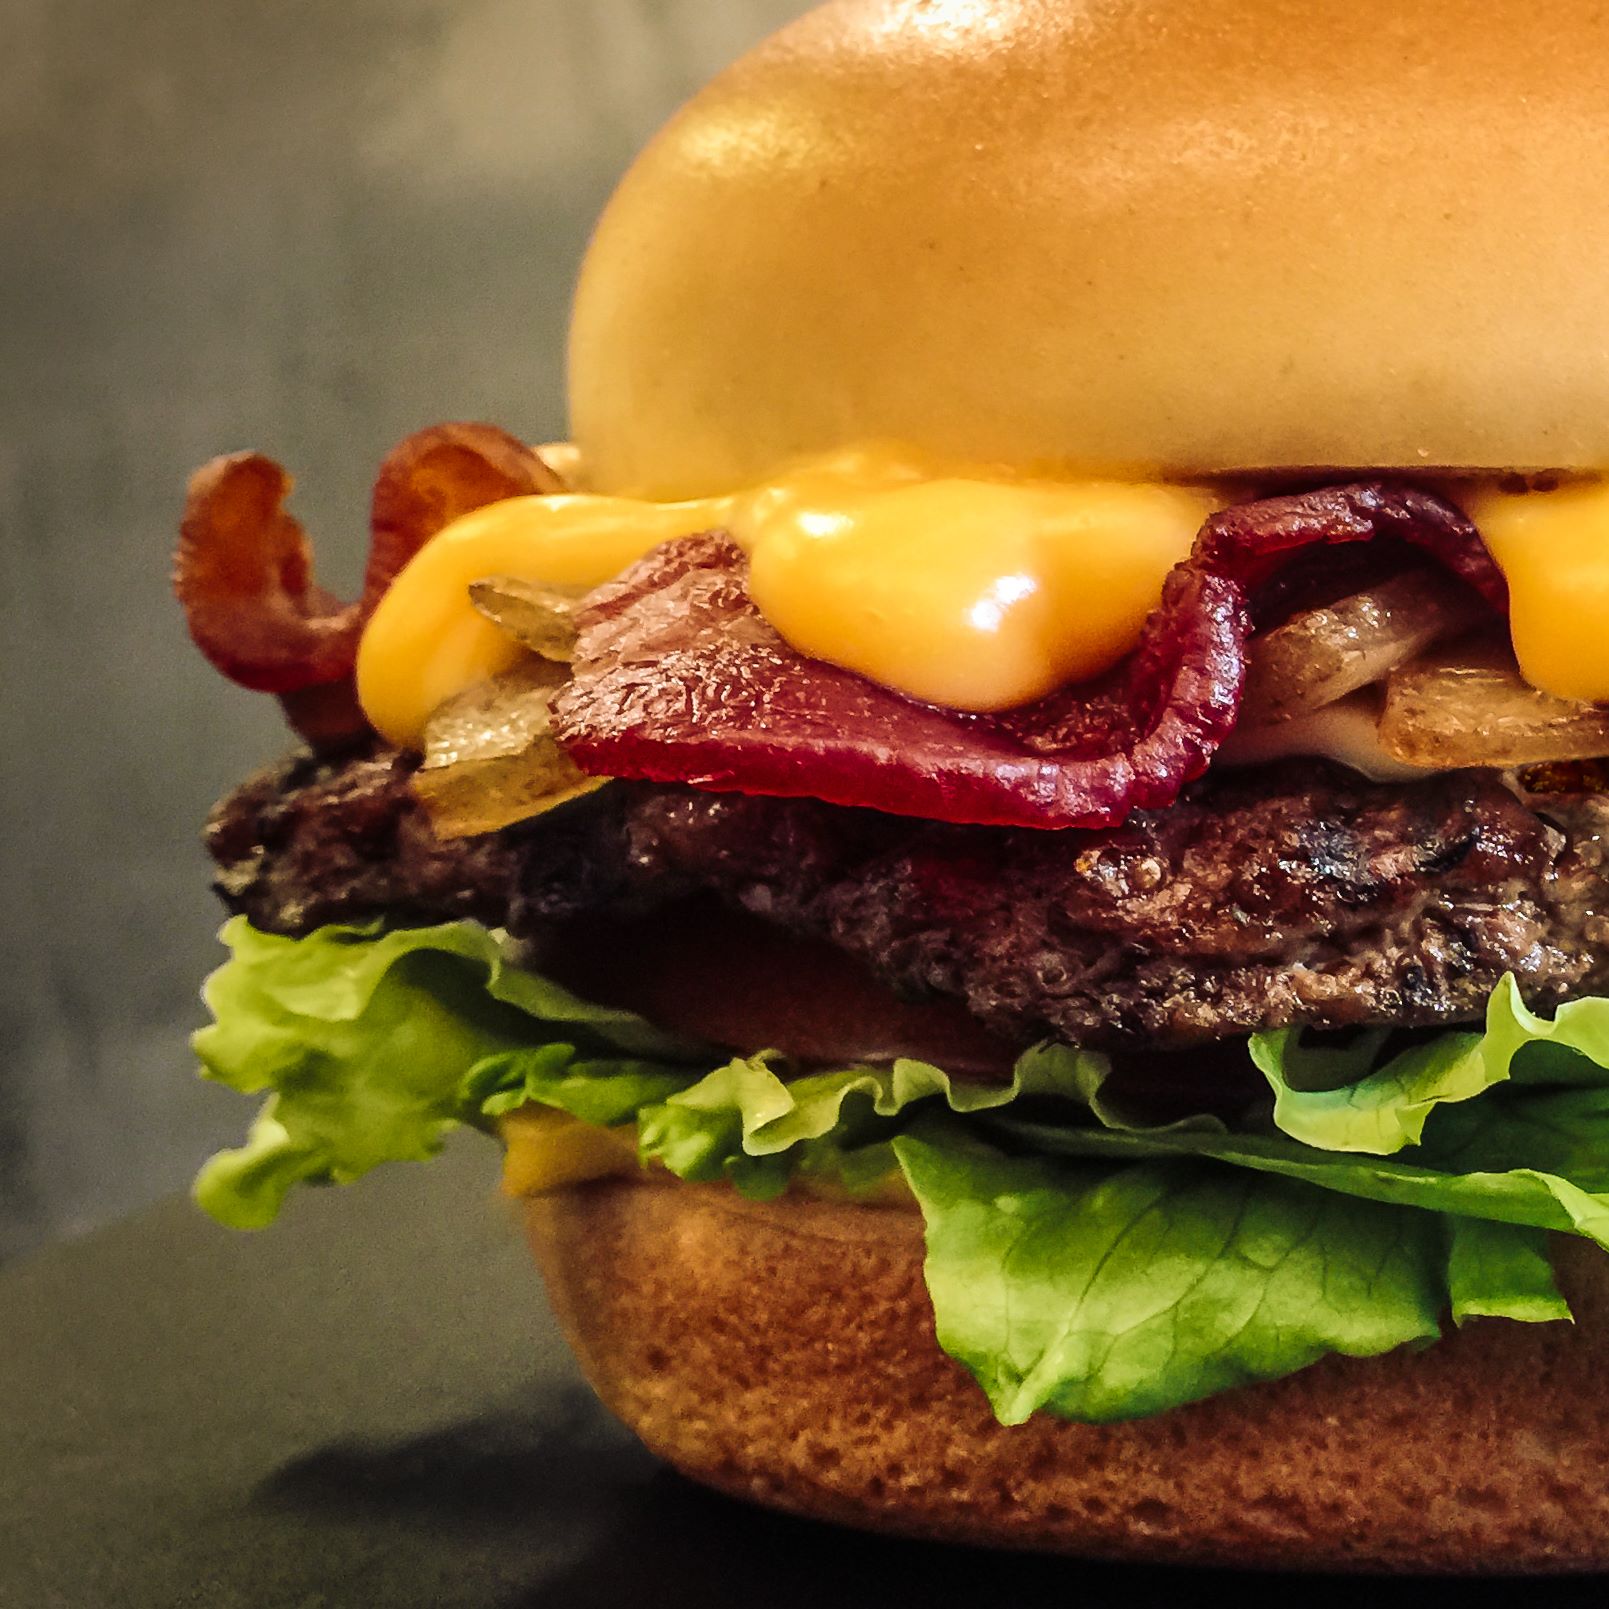 Expires soon: Buy one, get one free all natural burger at Hardee’s